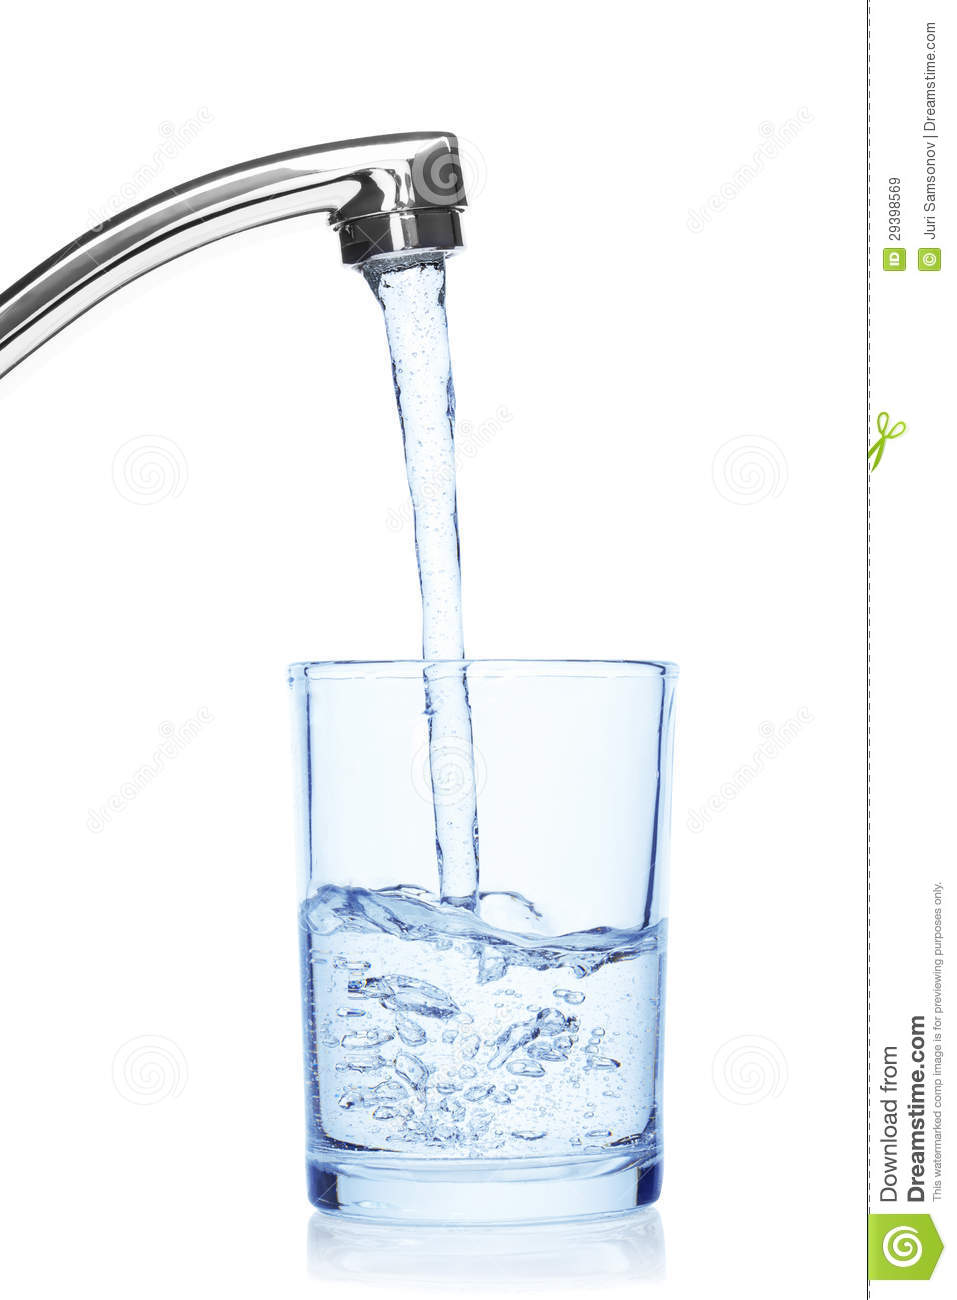 Glass Filled With Drinking Water From Tap  Royalty Free Stock Images